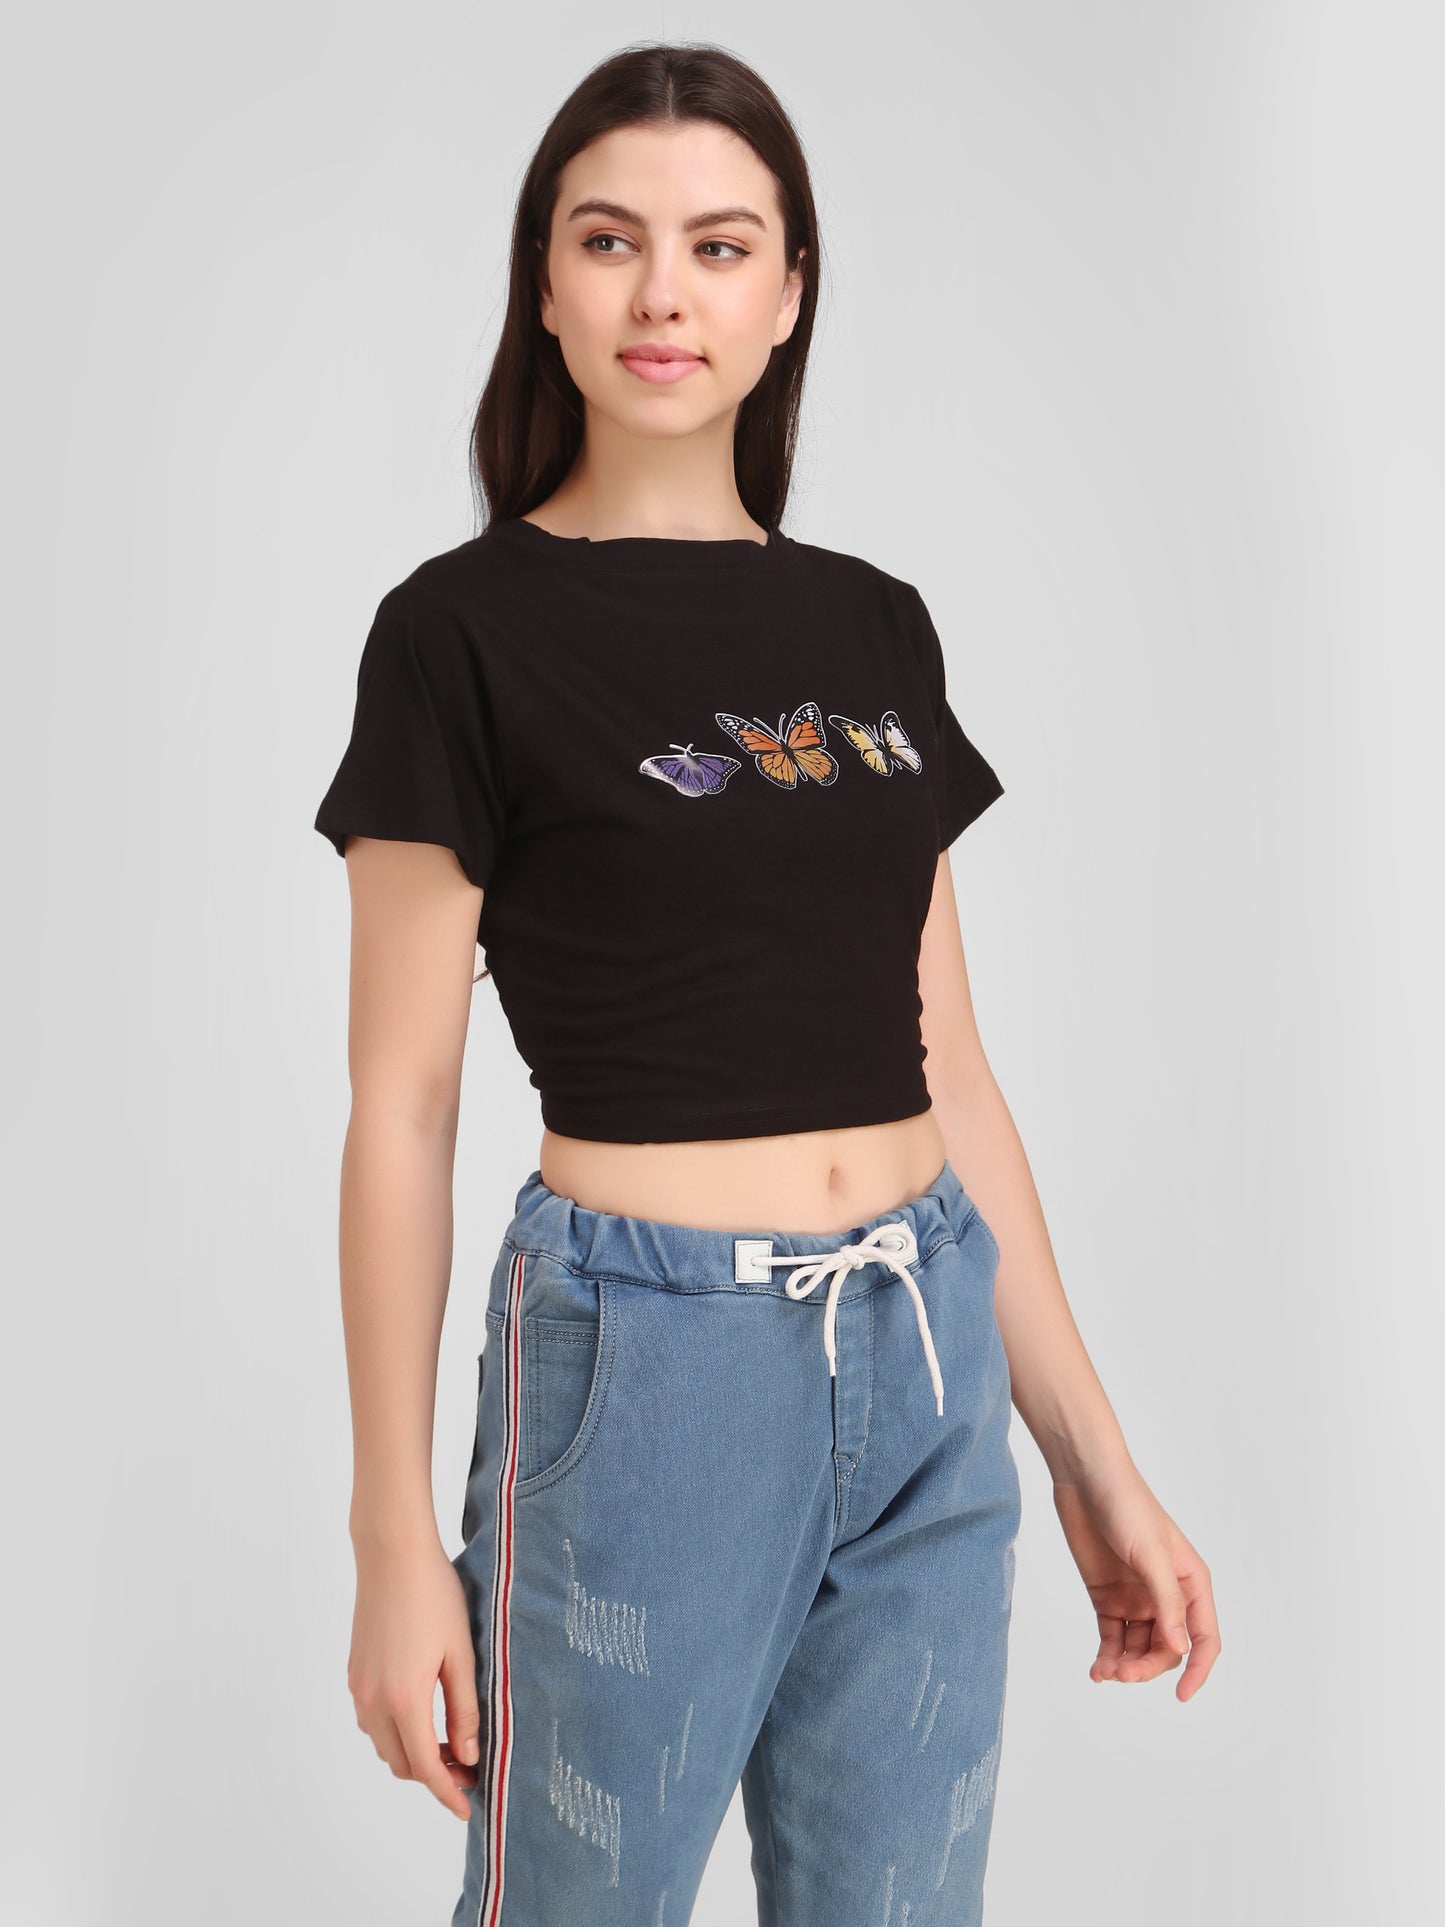 Blue Dog & Black Butterfly Print Combo(2 Tops) Crop Tops!!